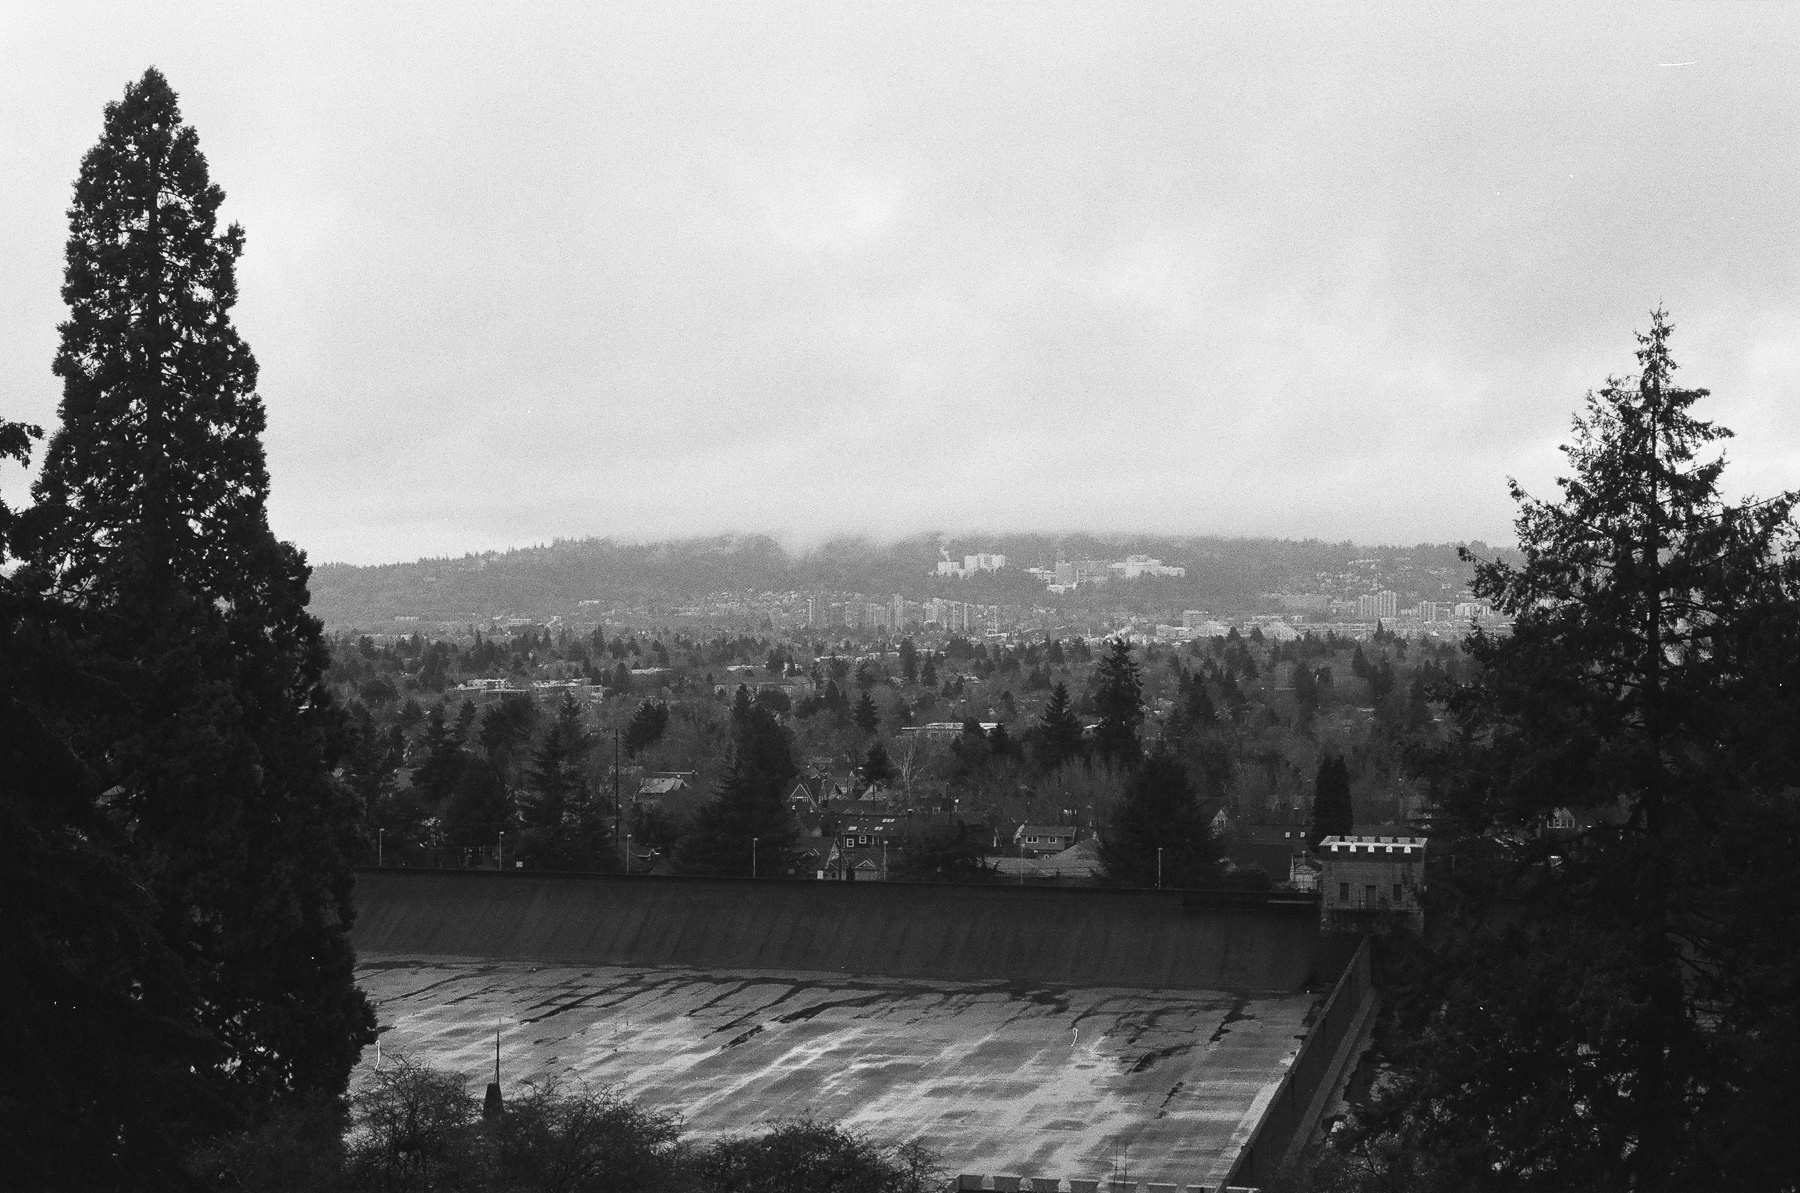 Grainy black and white film photo of an empty reservoir in the distance framed by two tall trees and with an expansive view of trees and city skyline with clouds above behind it.